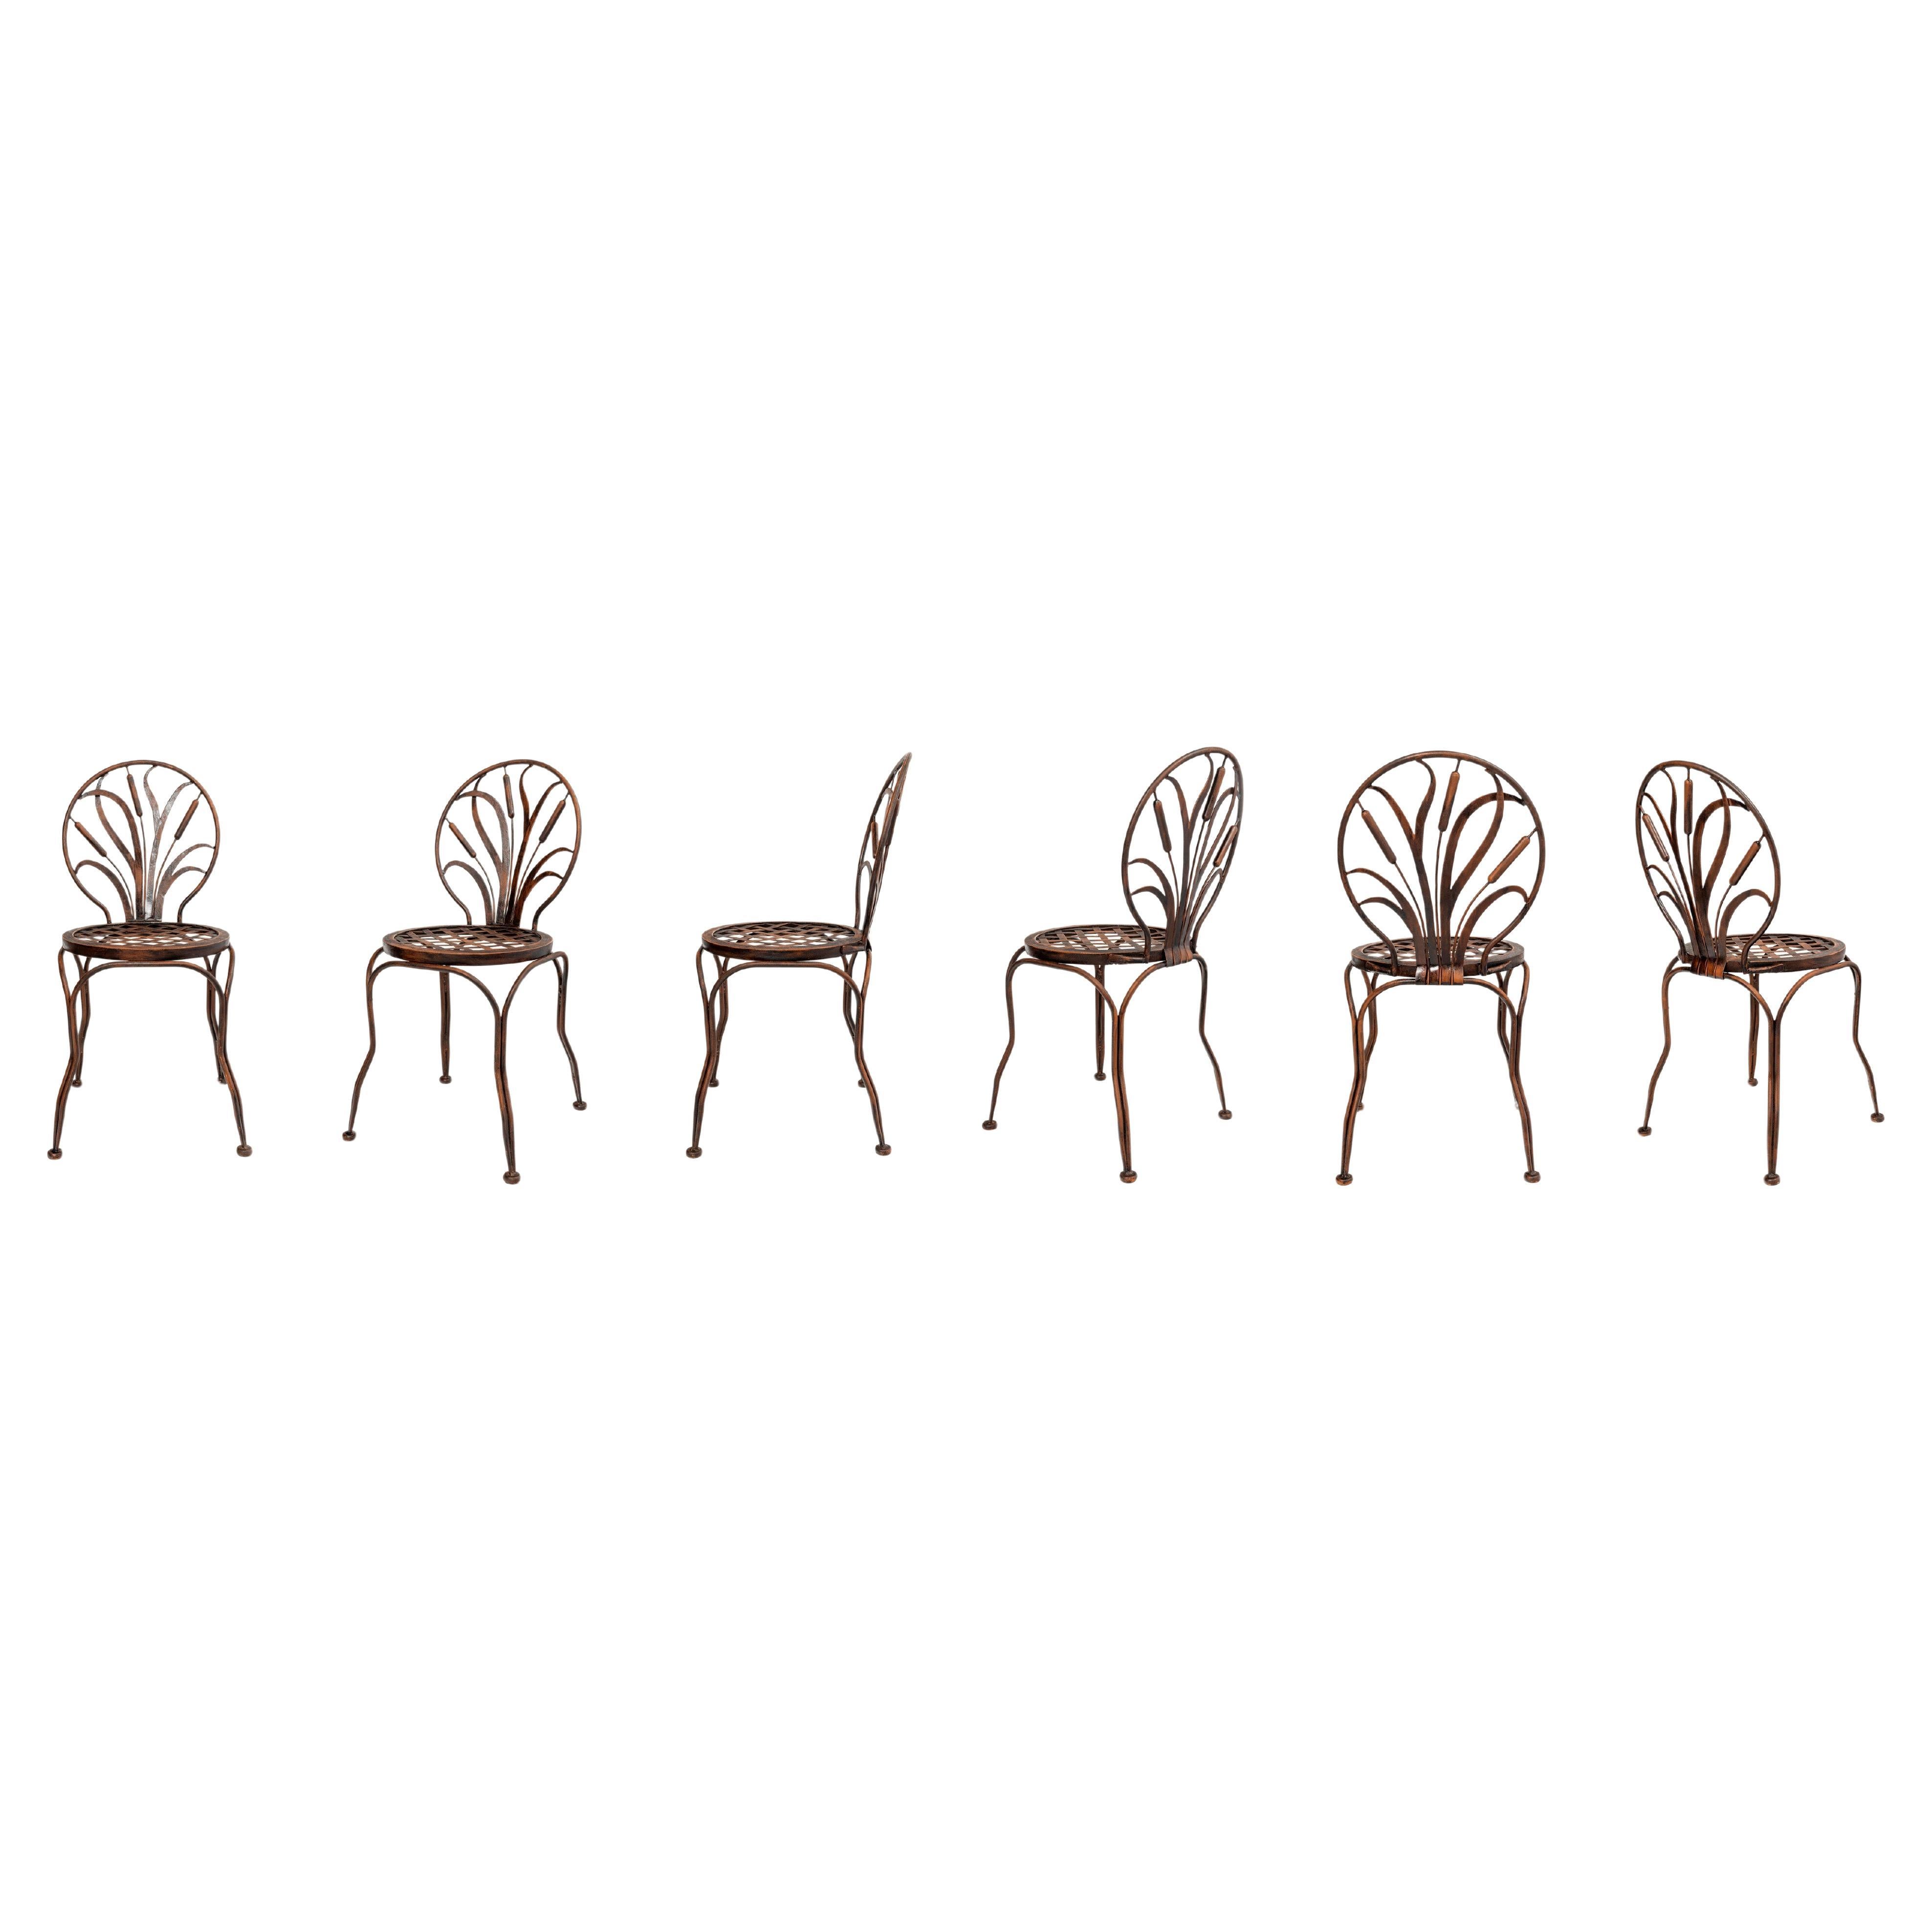 Set of six patinated wrought iron chairs, France, late 19th century.